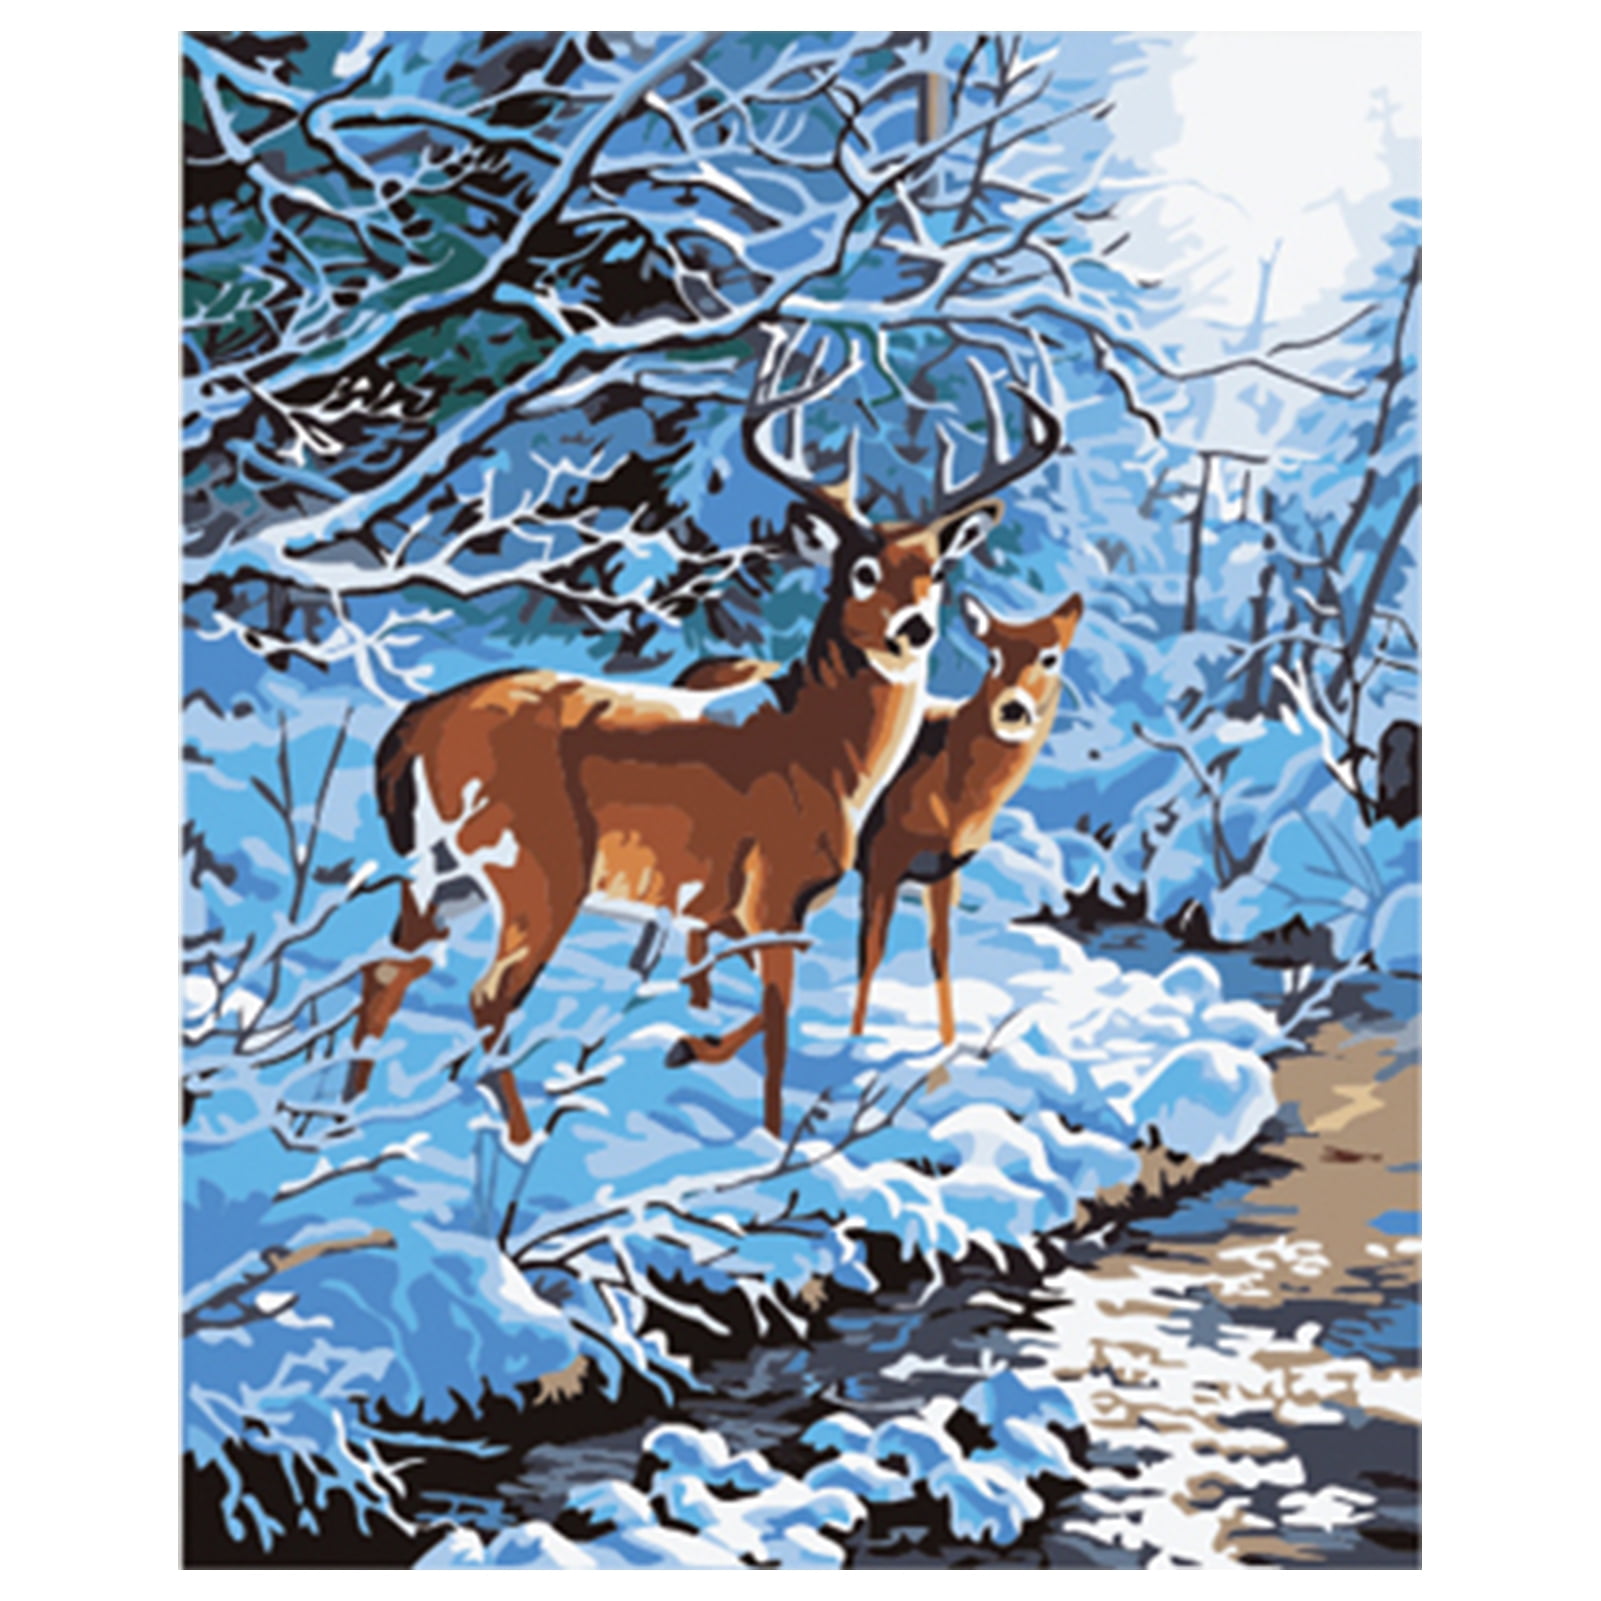 Frameless Paint by Numbers Kits Deer Flower Oil Painting By Numbers DIY Hand-painted Wall Picture Modern Decor for Adults Children Seniors Junior Beginner Canvas Diy oil Painting Kits 